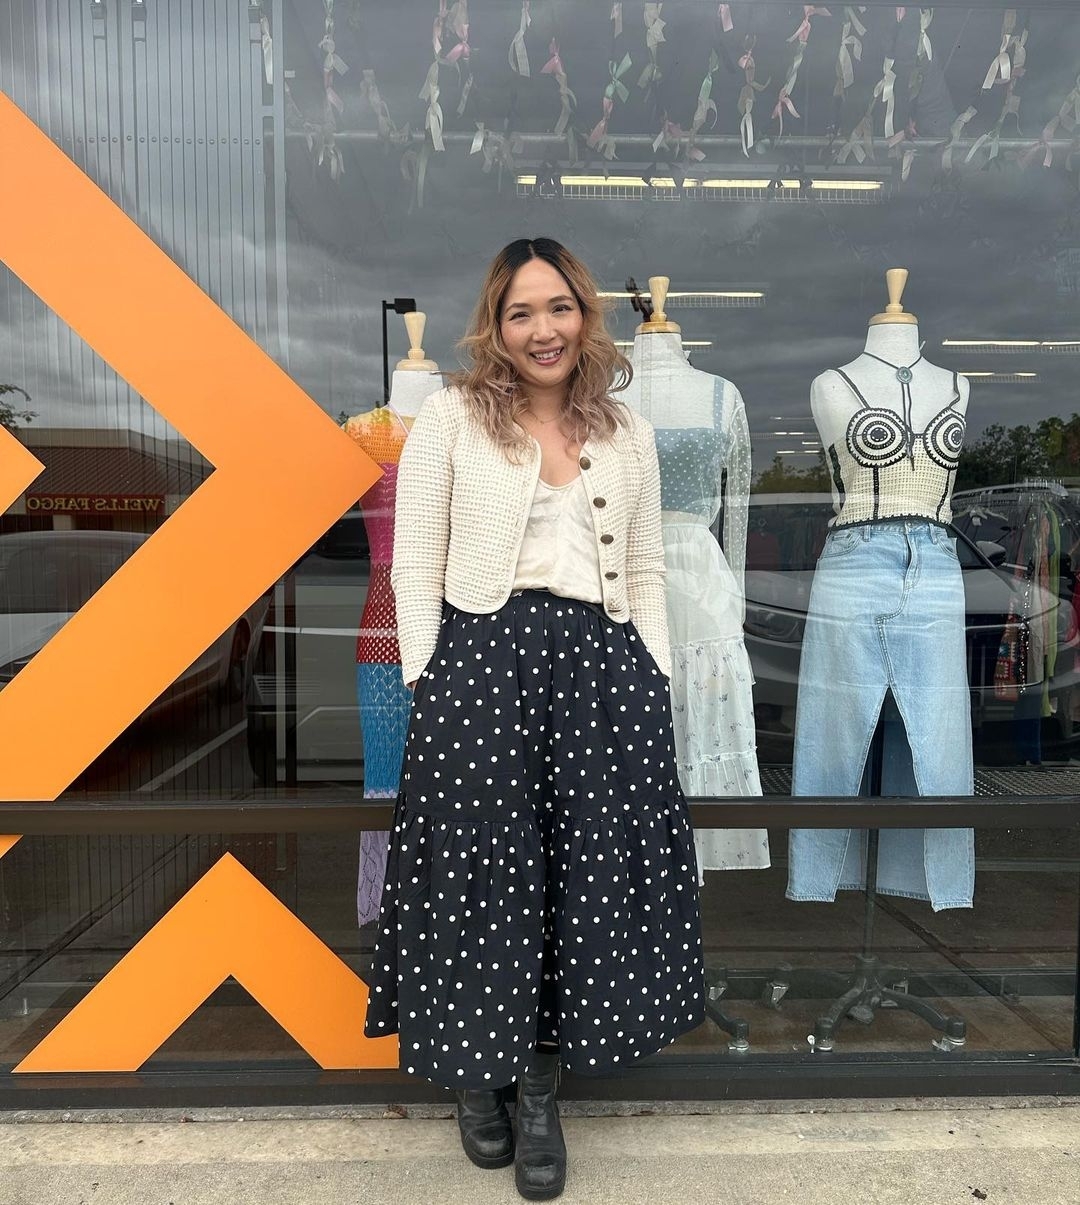 20 year fly by when you're having fun. Congratulations to the Store Manager of our Blossom Hill location in San Jose on celebrating 20 years at Crossroads! We love and appreciate everything you do as such an integral part of our team. 🧡

Are you looking for a career in second hand fashion? Crossroads may be the place for you. Click the link in our bio to learn more about careers at Crossroads. 

📸: Crossroads Blossom Hill @crossroadsnorcal

#crossroadstrading #crossroadsfinds #crossroadsstore #fashionfinds #buyselltrade #style #thriftfinds #consignment #shopping #womensfashion #mensfashion #fashionblogger #ootd #fashion #thrift #sustainablefashion #secondhandfirst #shopthrift #consignment #thrifted